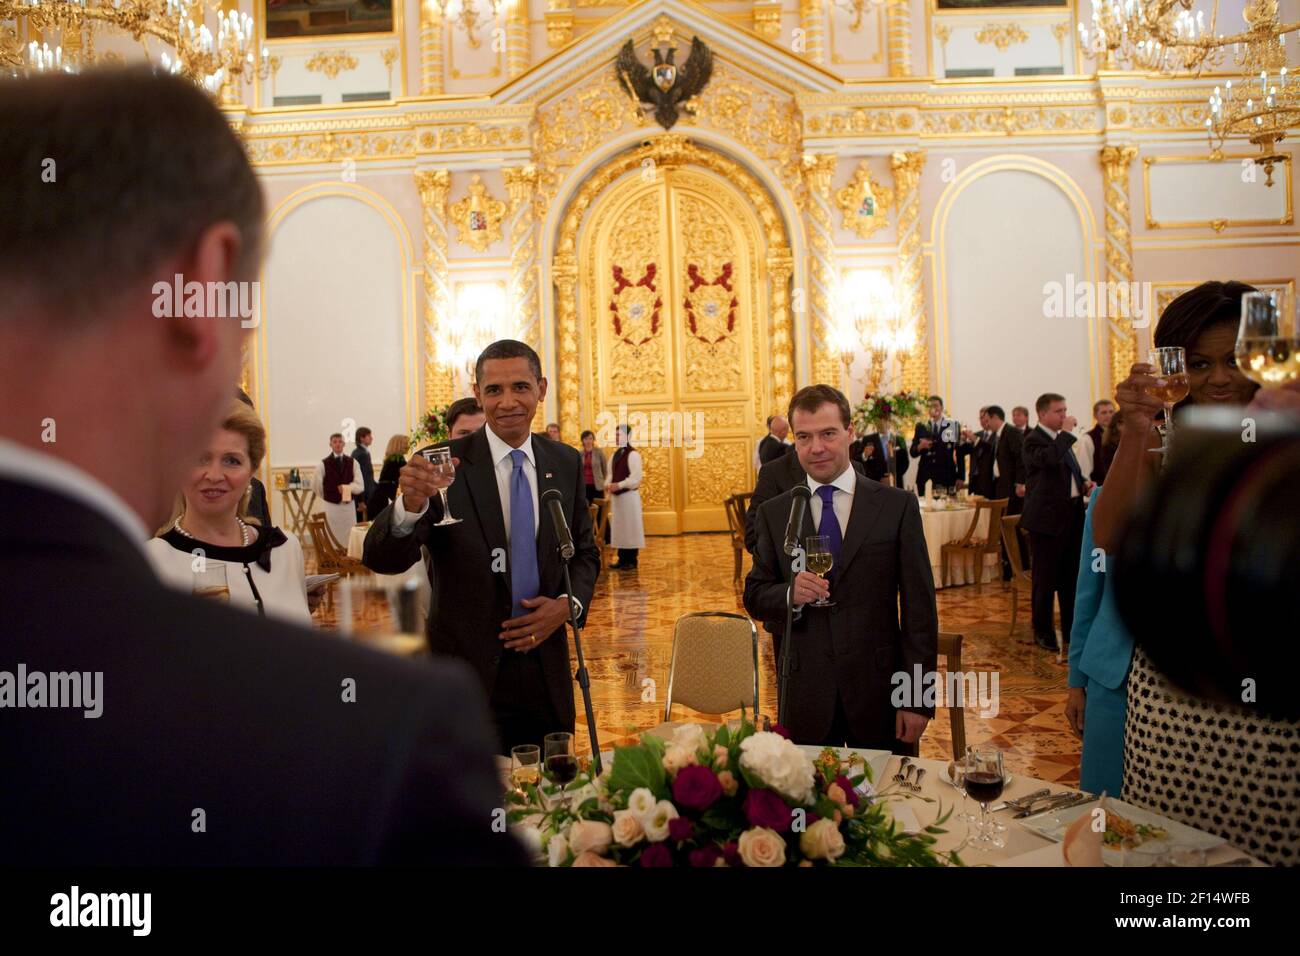 President Barack Obama and First Lady Michelle Obama attend a reception in the Kremlin with Russian President Dimitry Medvedev his wife Svetlana Medvedeva and the Russian Orthodox Patriarch Moscow Russia July 7 2009 Stock Photo